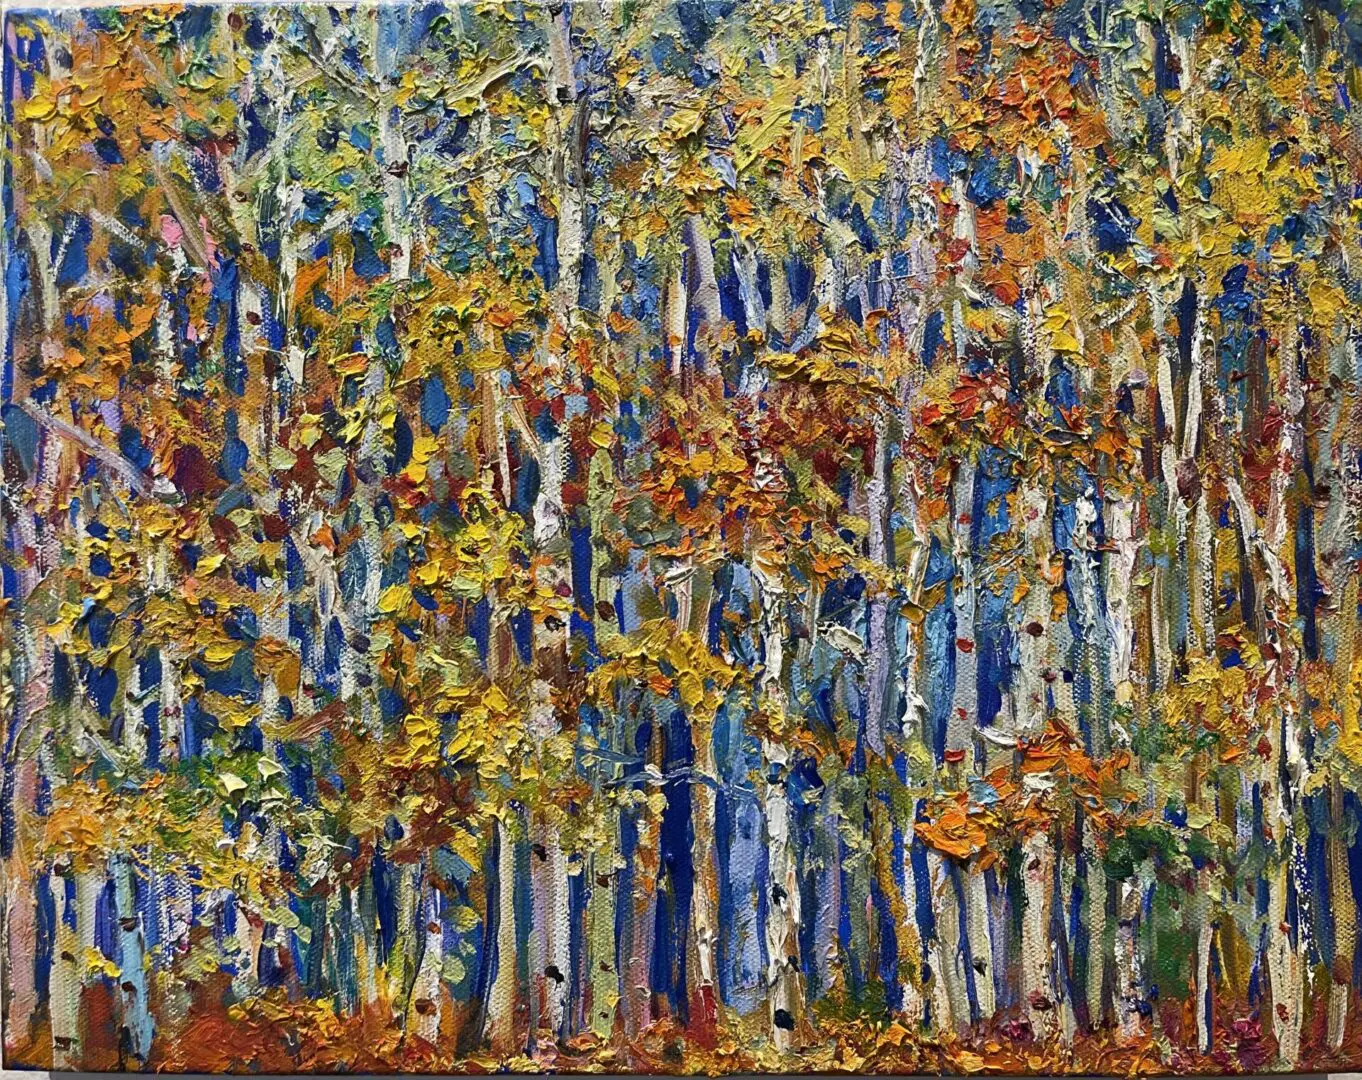 A painting of aspen trees in autumn colors.